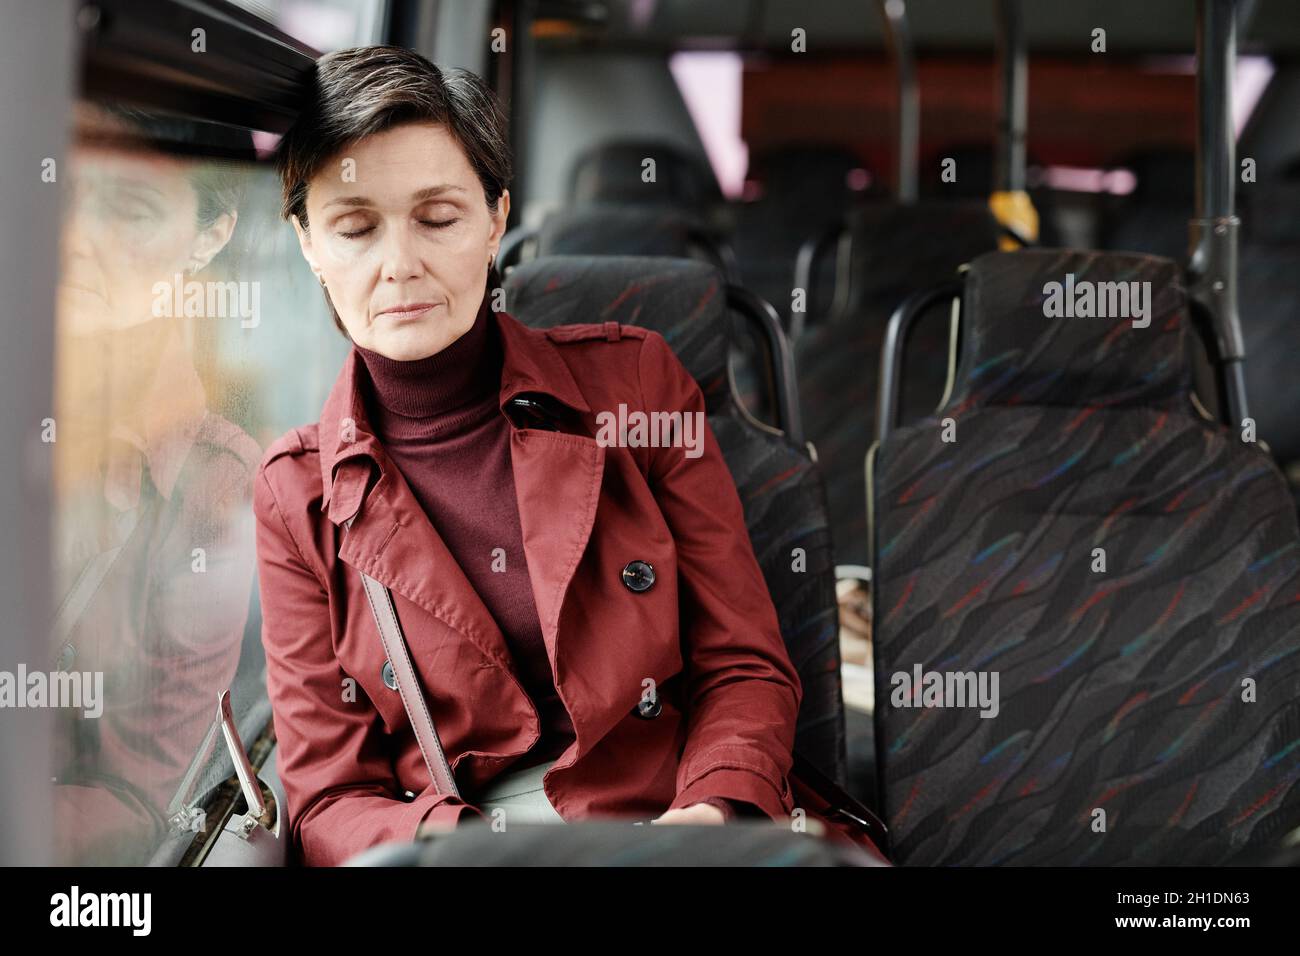 Portrait of elegant mature woman sleeping on bus while traveling by public transport in city, copy space Stock Photo